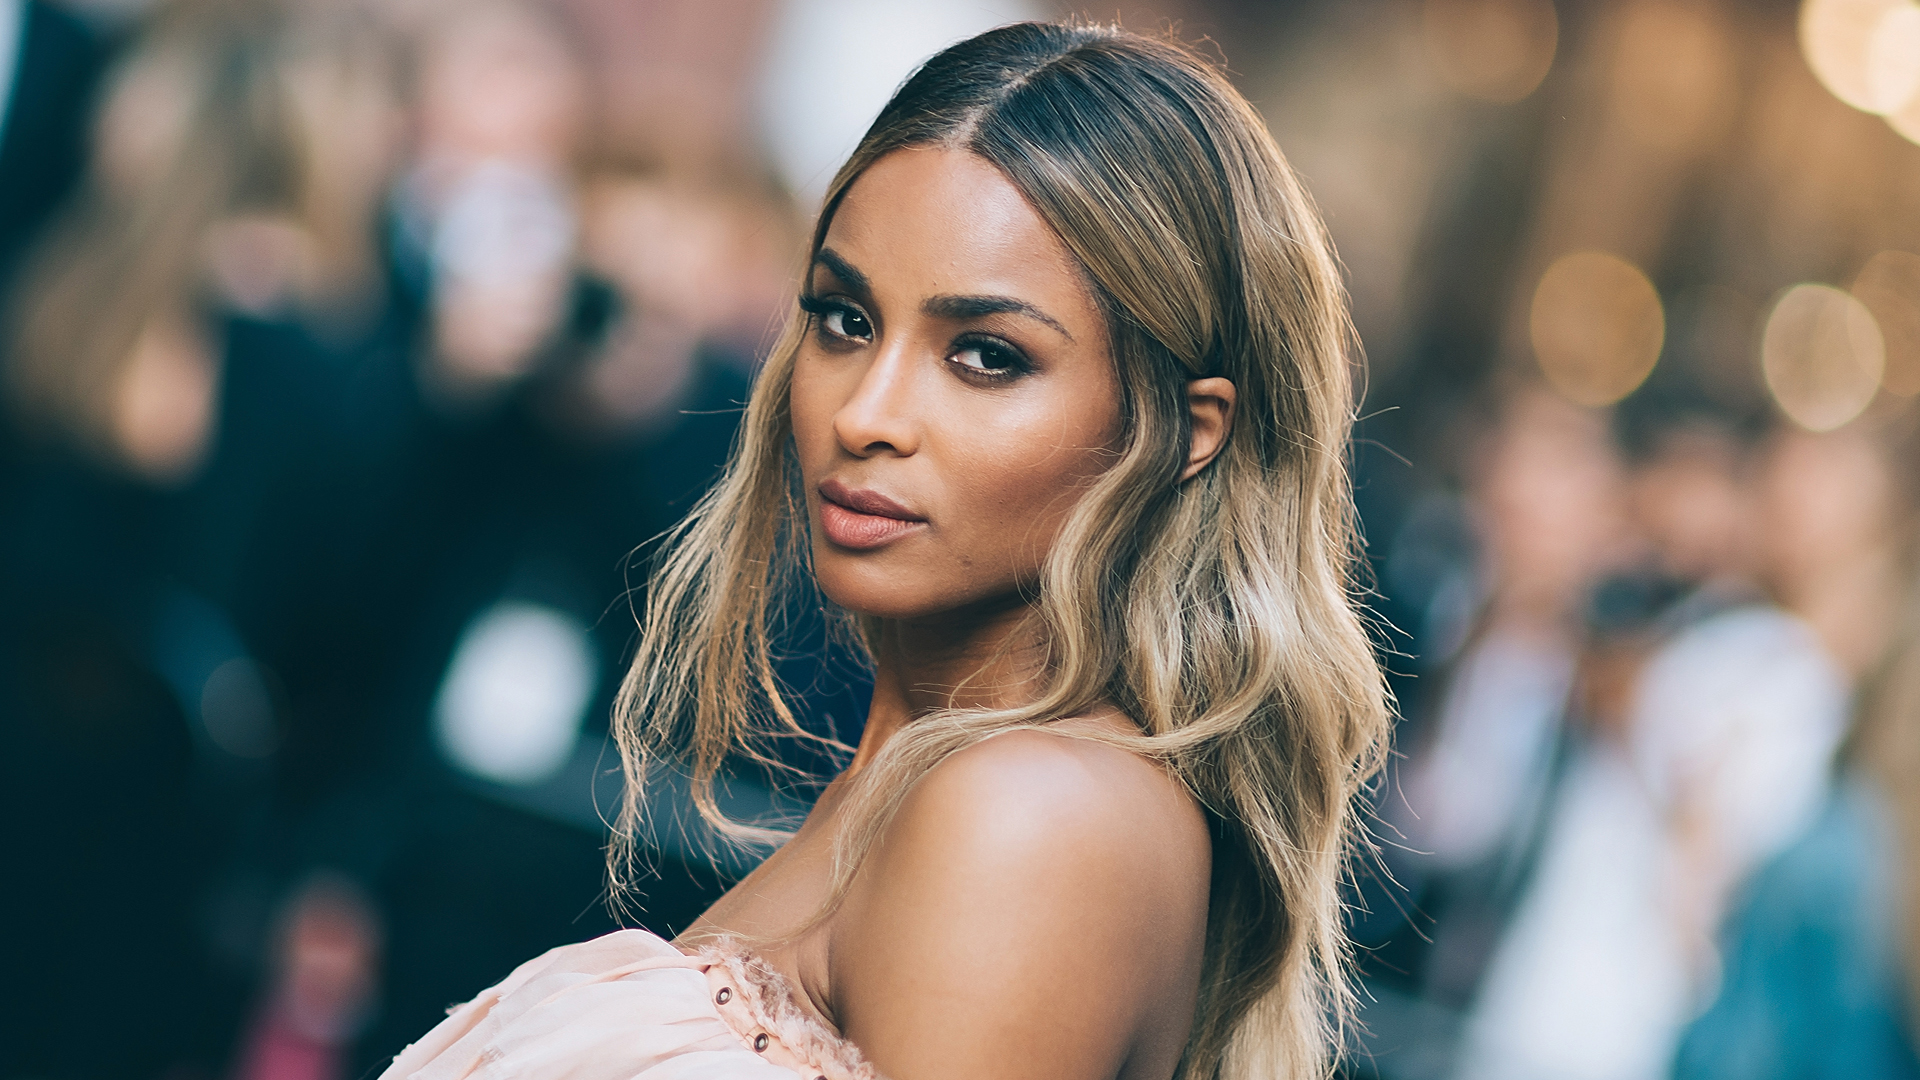 Meta Taps Grammy-Winning Artist Ciara To Amplify Small Black-Owned Businesses